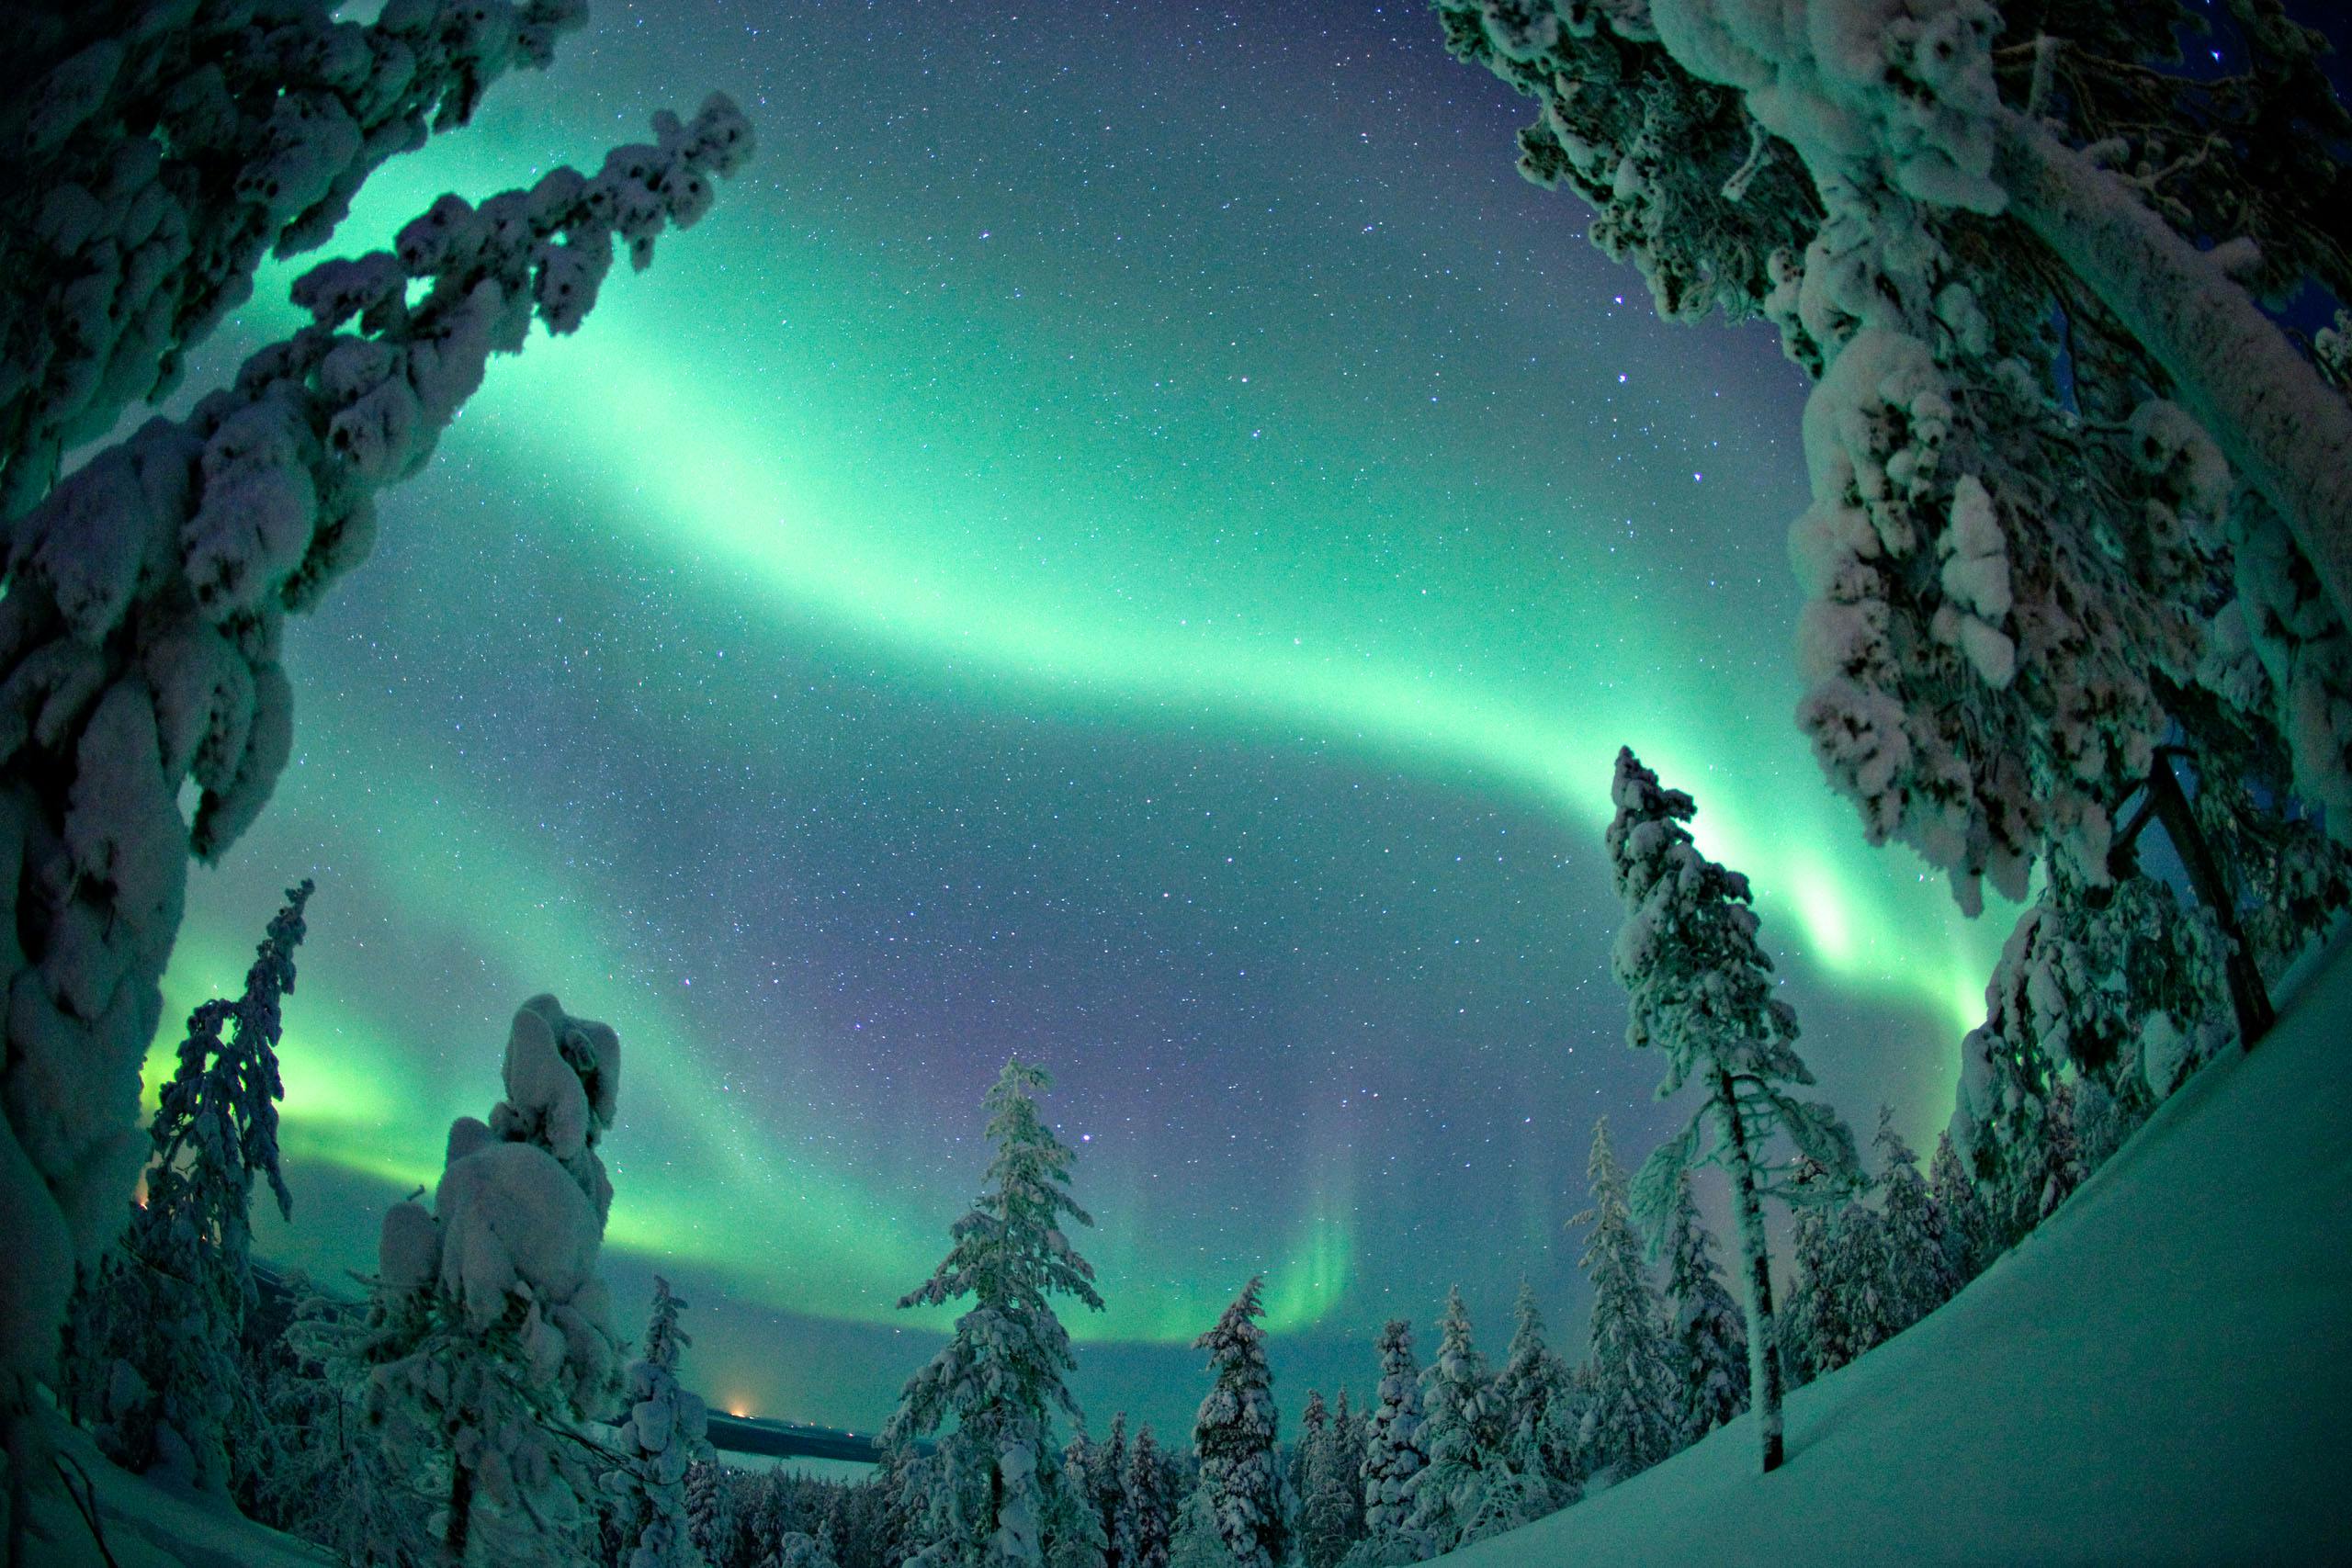 Photo hunt for the Northern lights